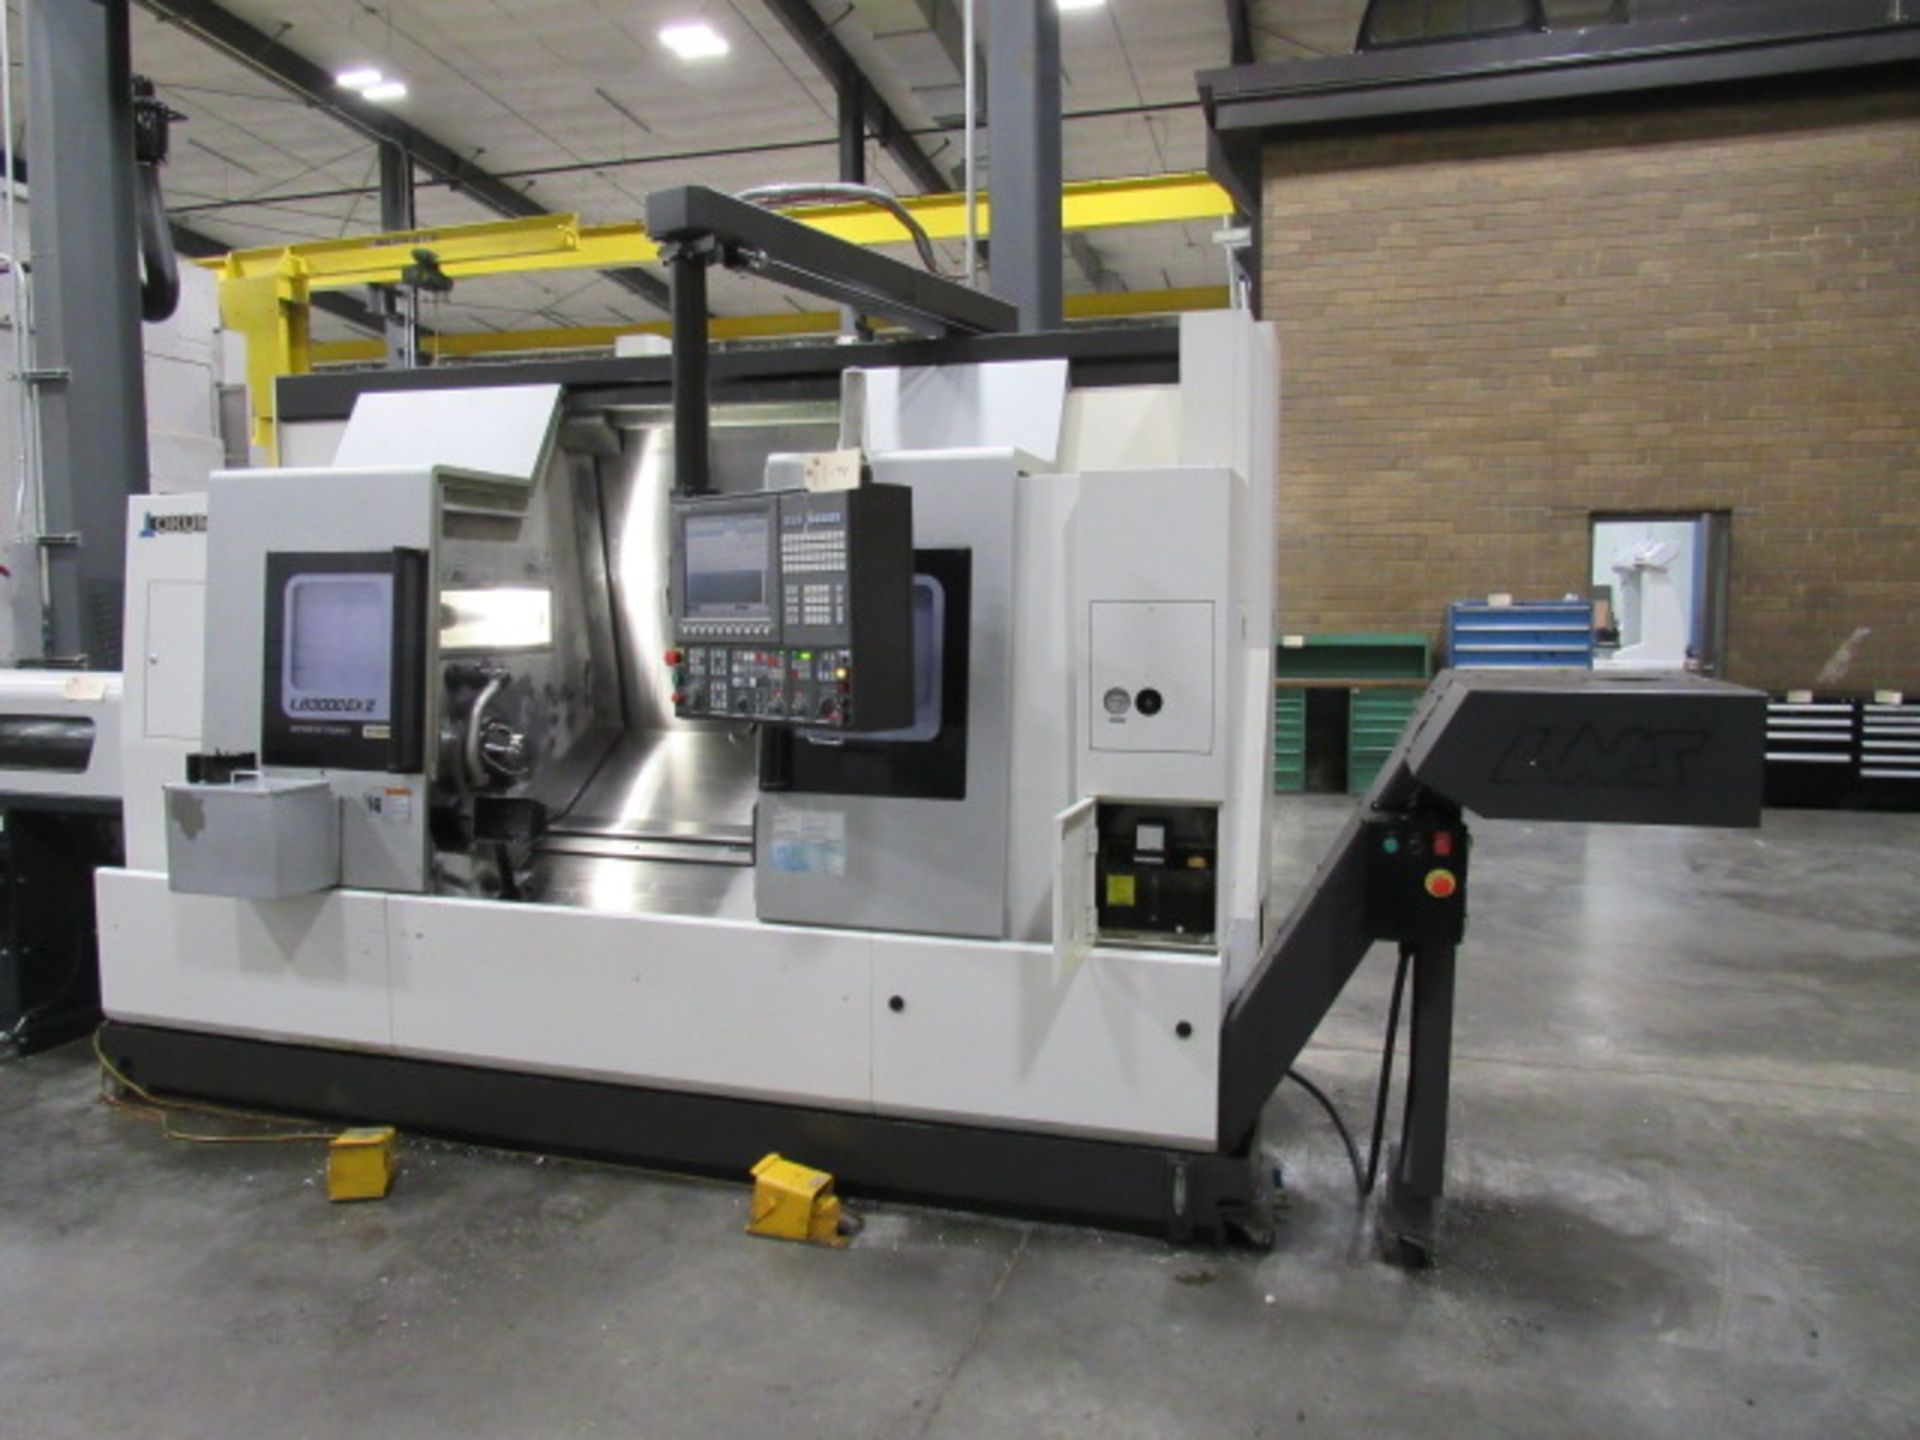 Okuma LB-3000EXII Spaceturn 5-Axis Dual Spindle CNC Turning Center - Image 2 of 9